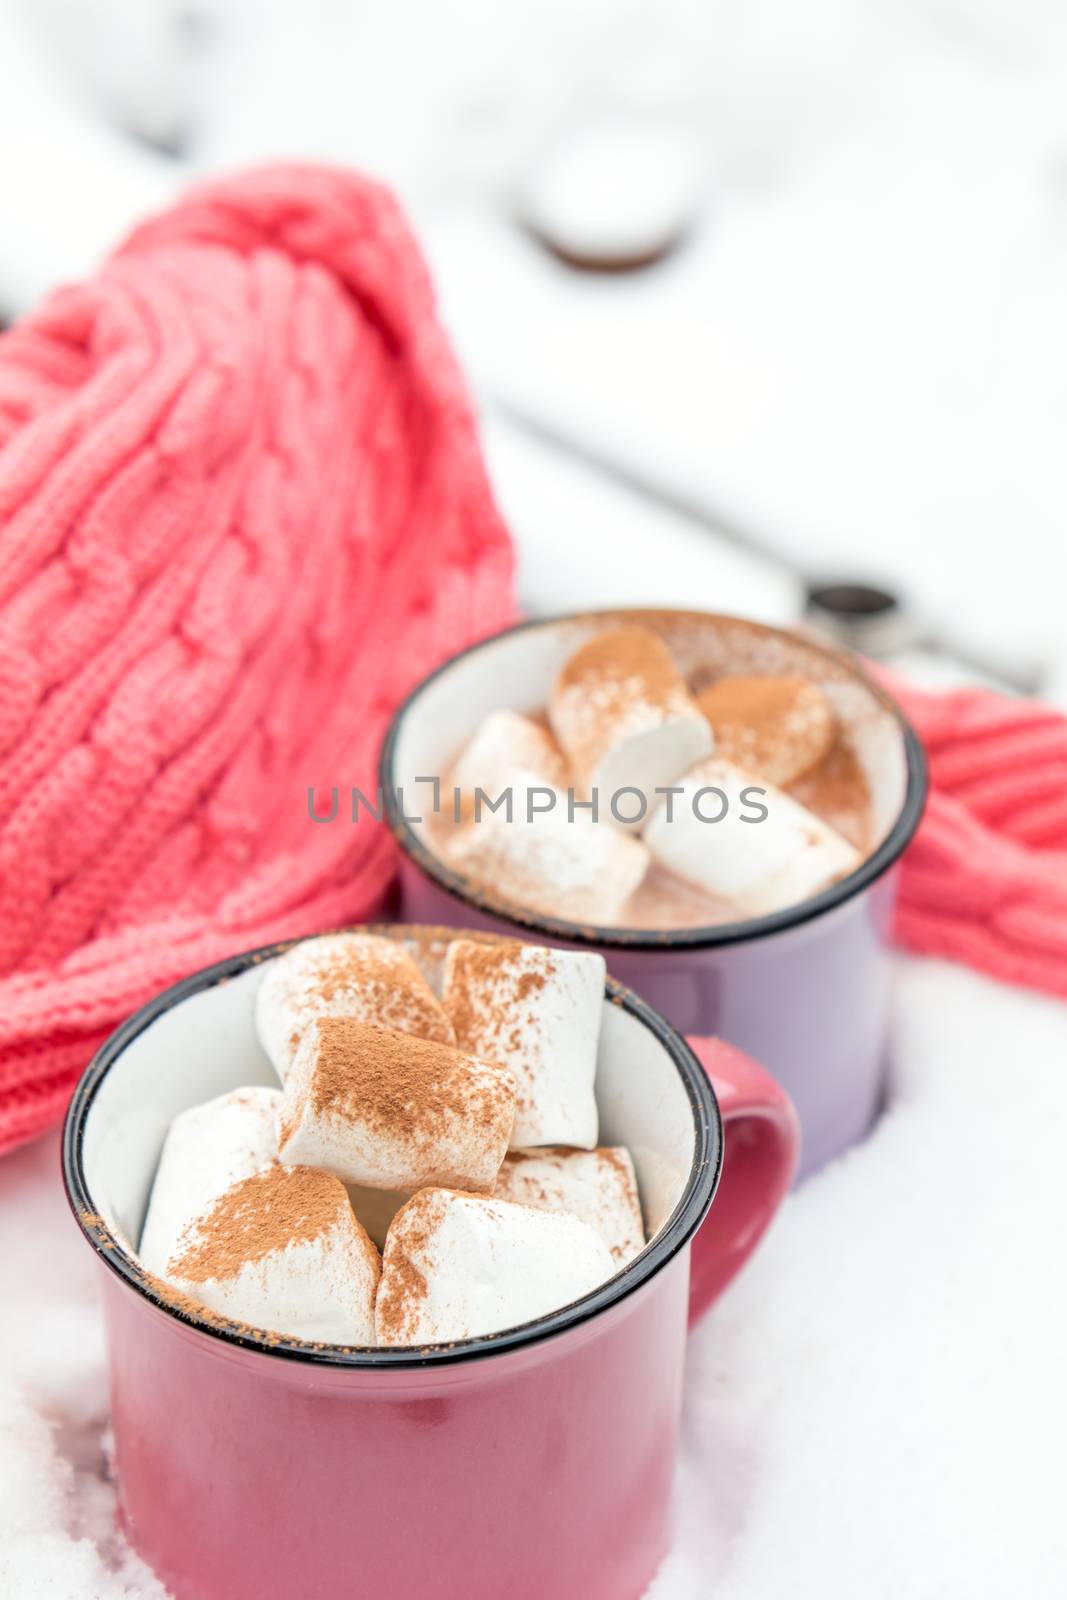 Hot chocolate with marshmallow in pink cups by ArtSvitlyna